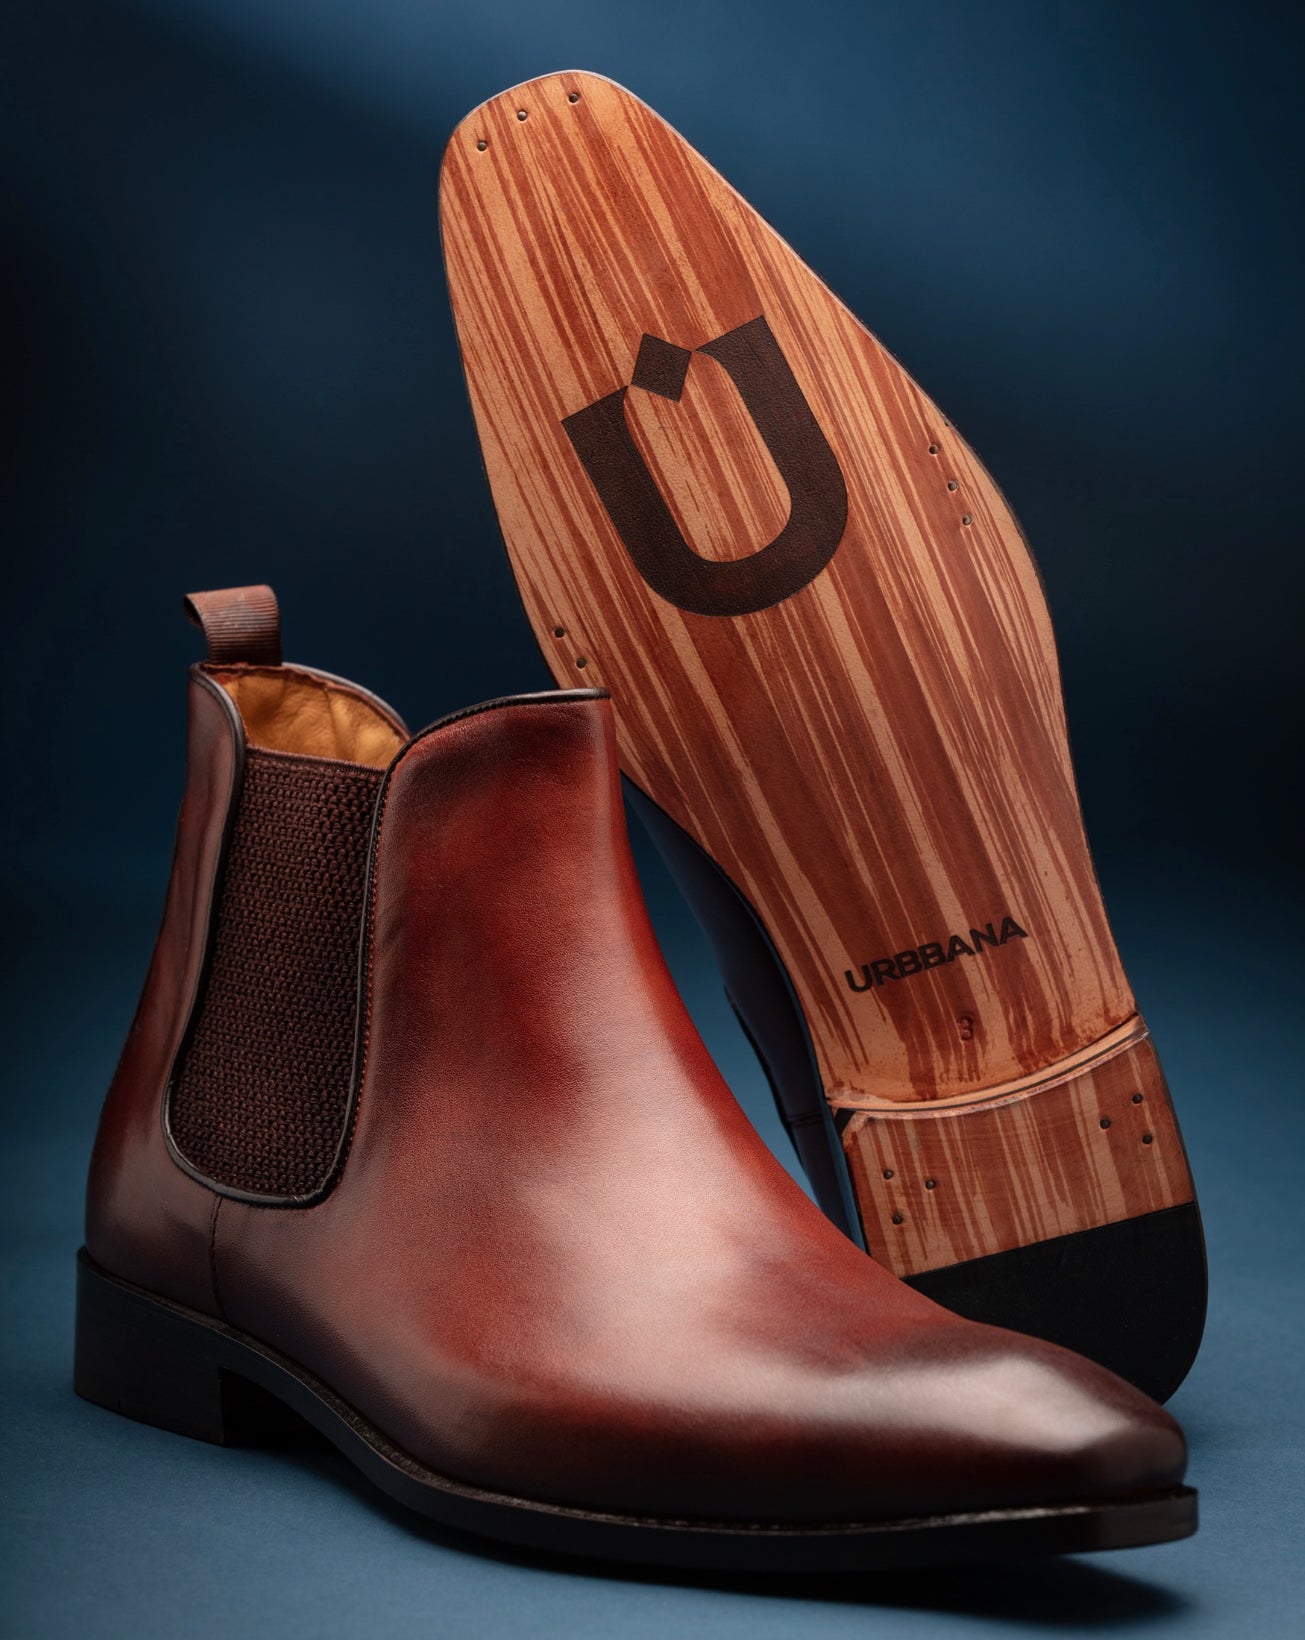 The Don Chelsea Boots - Cognac - Boots by Urbbana